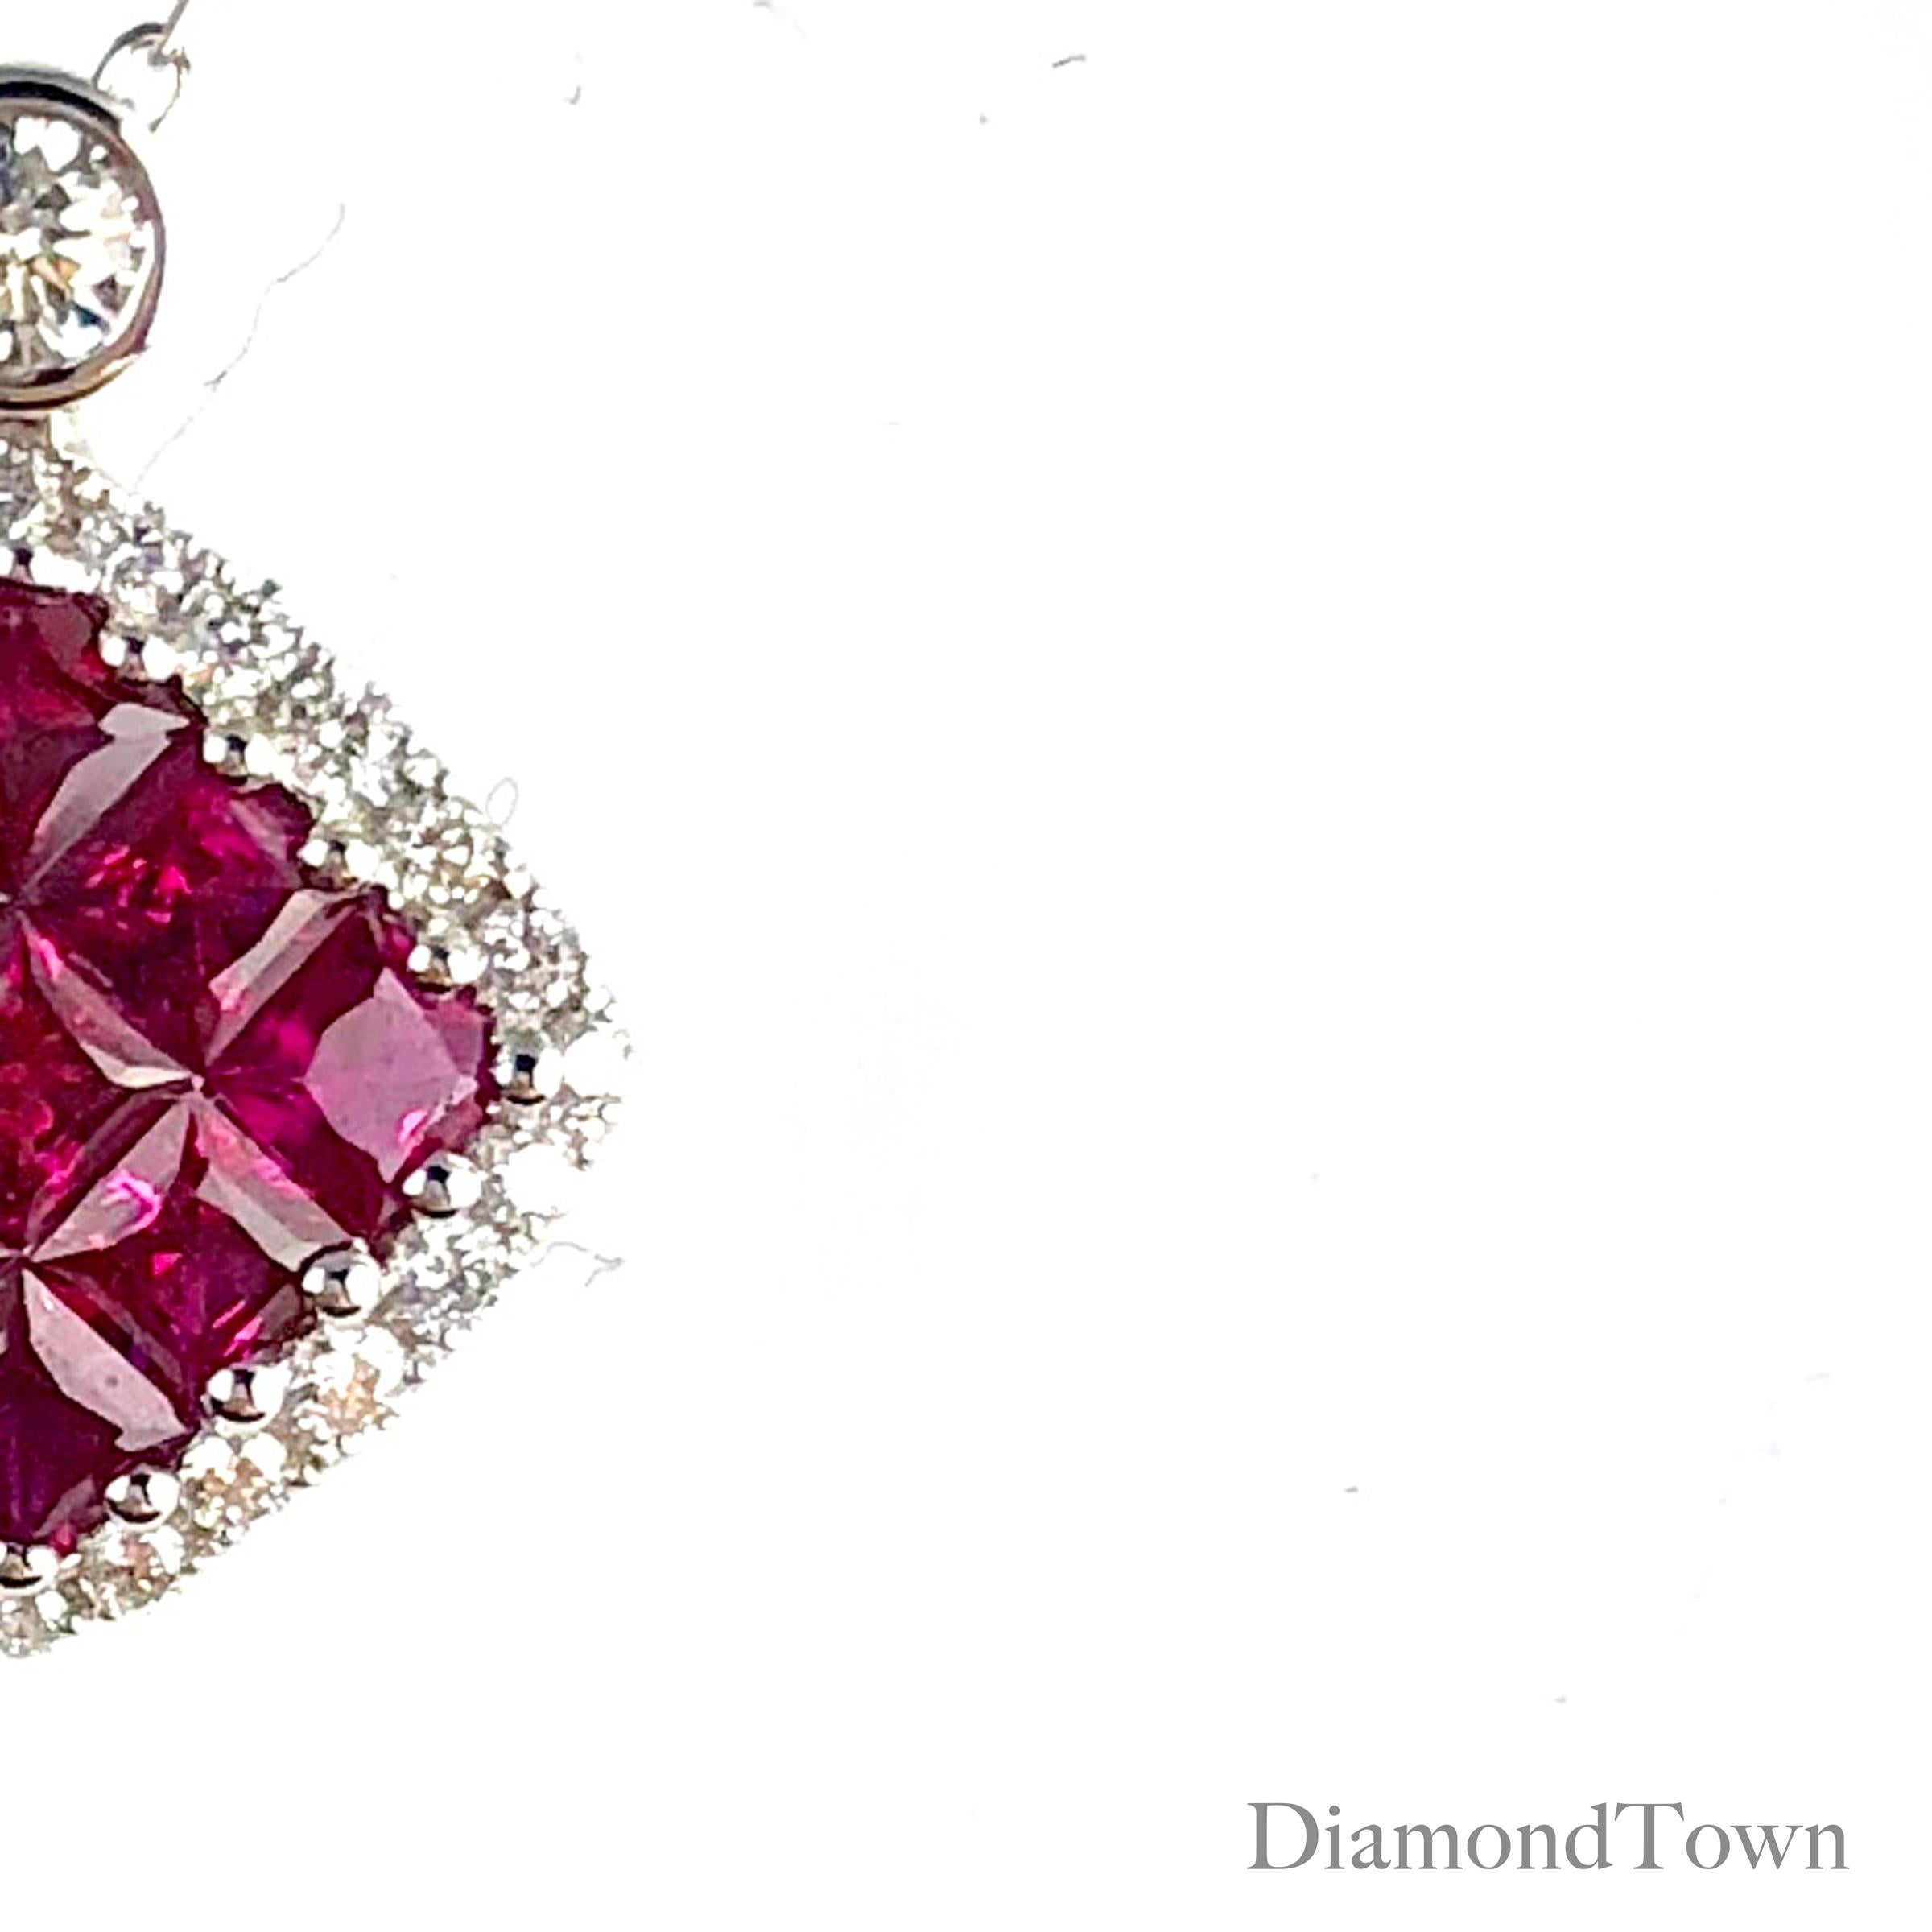 This pendant features a ruby cluster square center (nine stones, total weight 0.70 carats), surrounded by a halo of white diamonds (total diamond weight 0.19 carats) set in 18k White Gold.

An insurance appraisal certificate (COA) will be included.